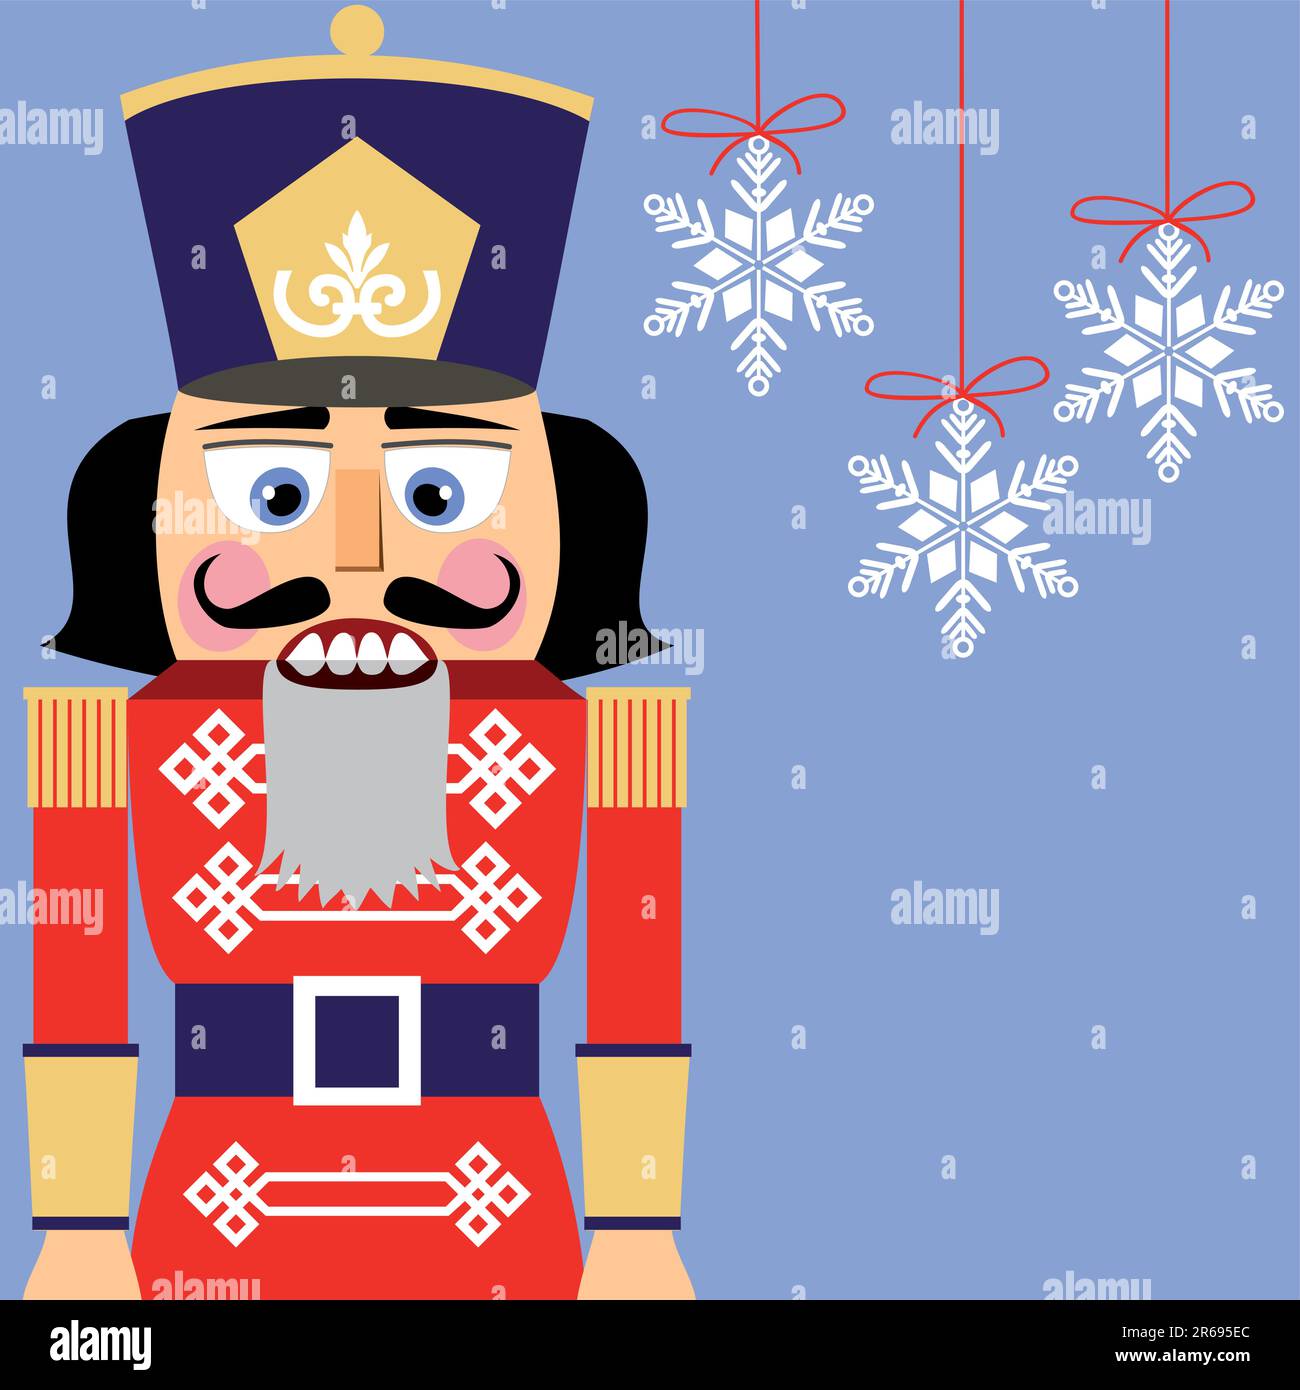 Nutcracker background with snowflakes, no gradients, full scalable vector graphic. Stock Vector